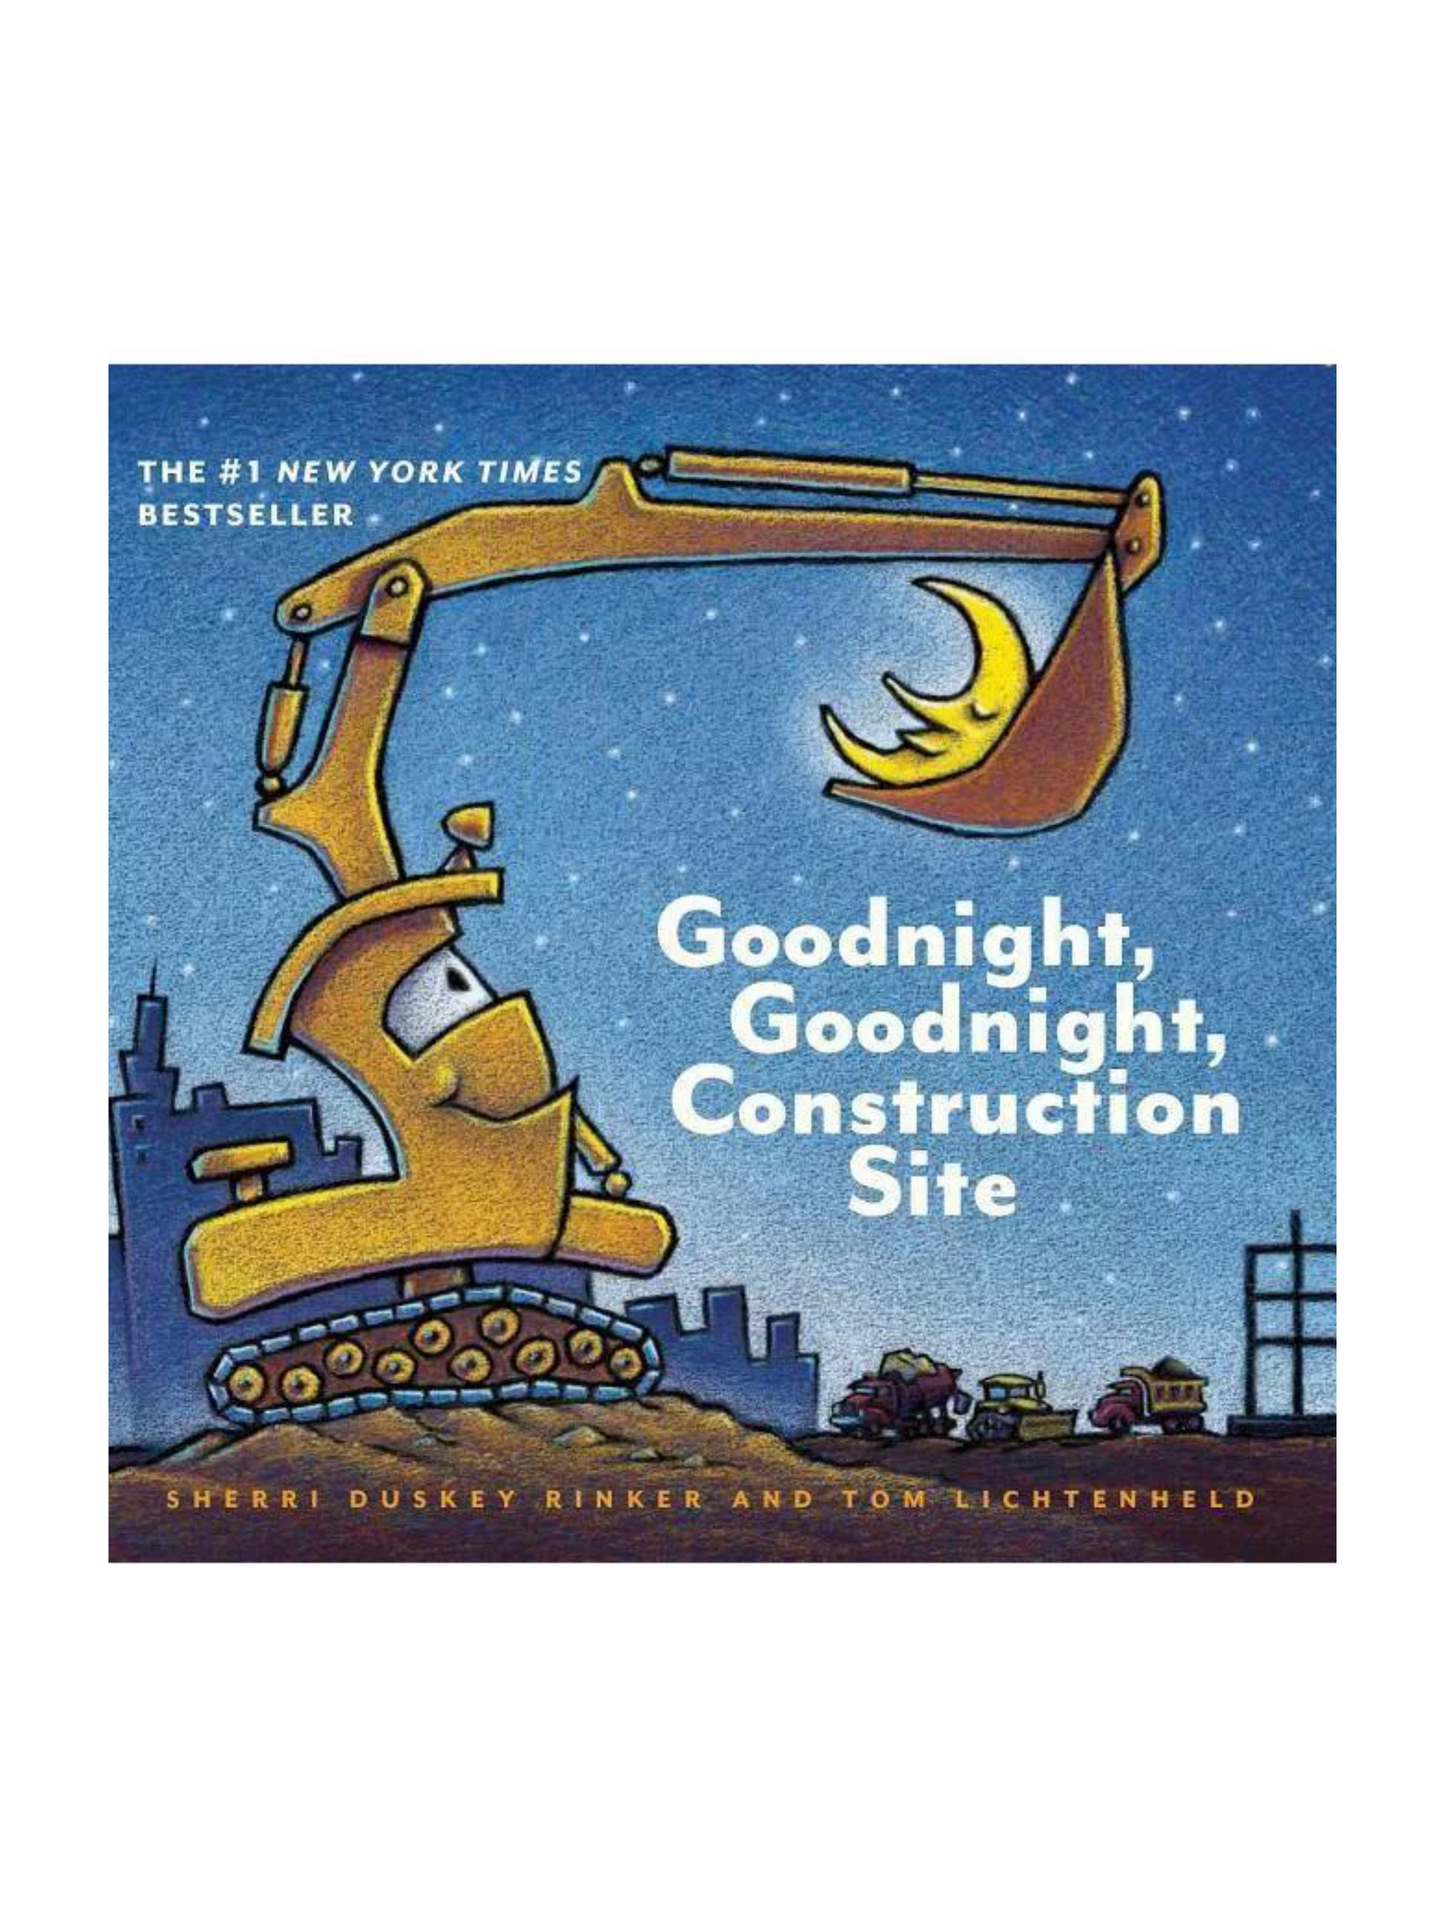 GOODNIGHT, GOODNIGHT CONSTRUCTION SITE BOOK  - THE LITTLE EAGLE BOUTIQUE